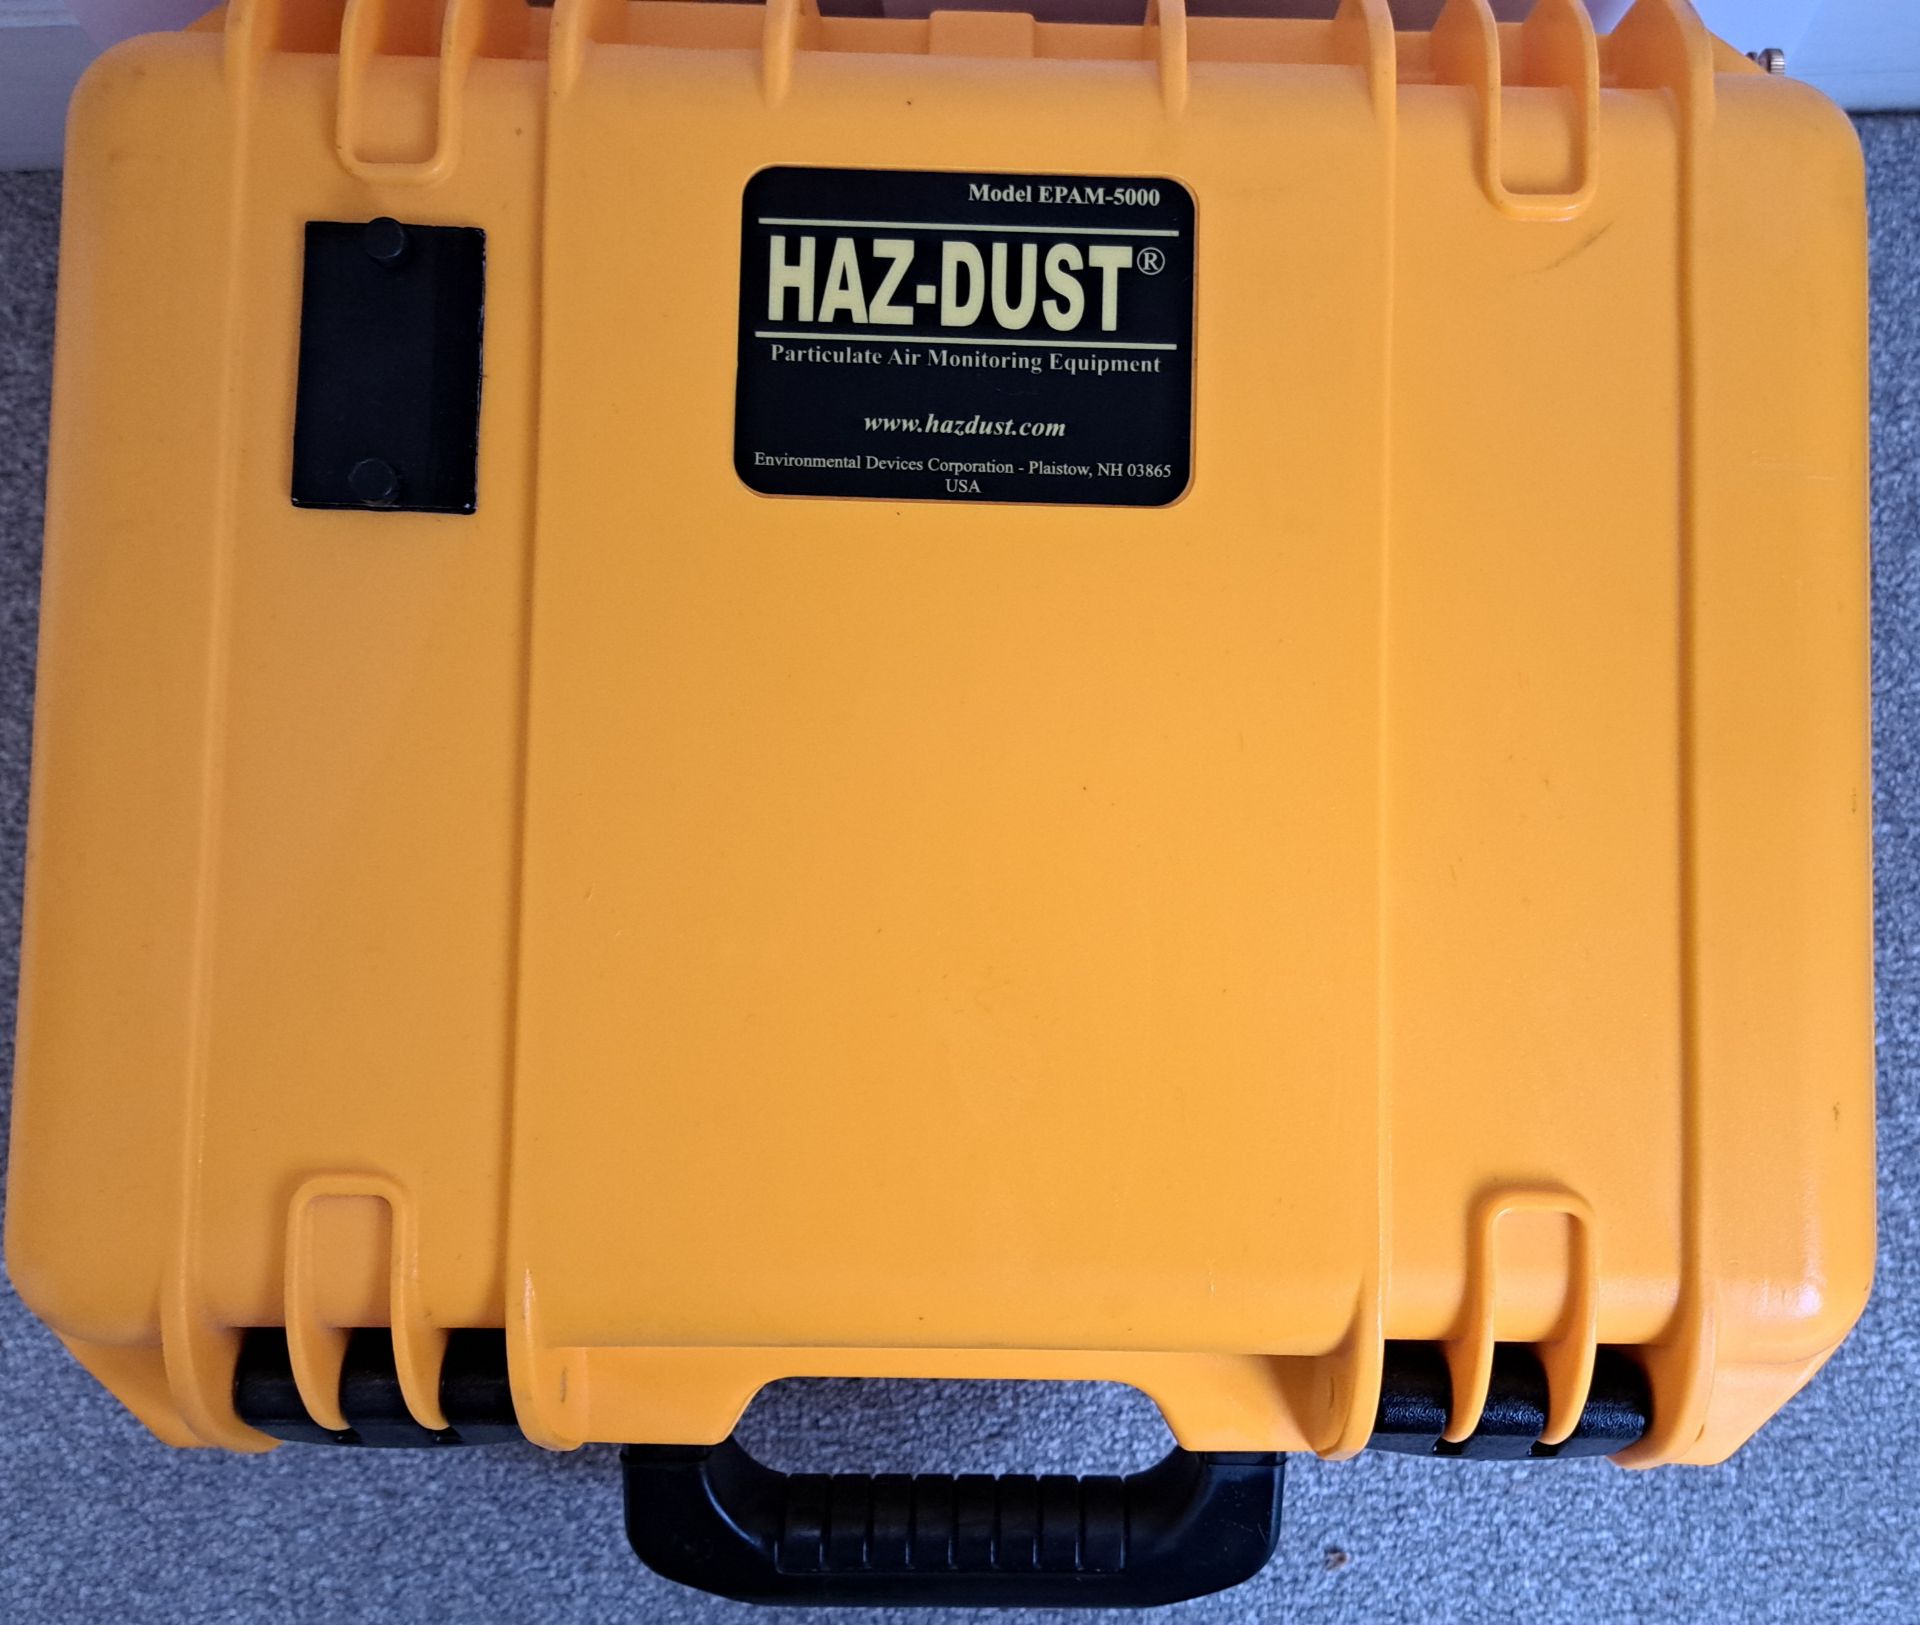 Haz-Dust Model EPAM-5000 Particulate Air Monitoring Equipment - Image 4 of 8